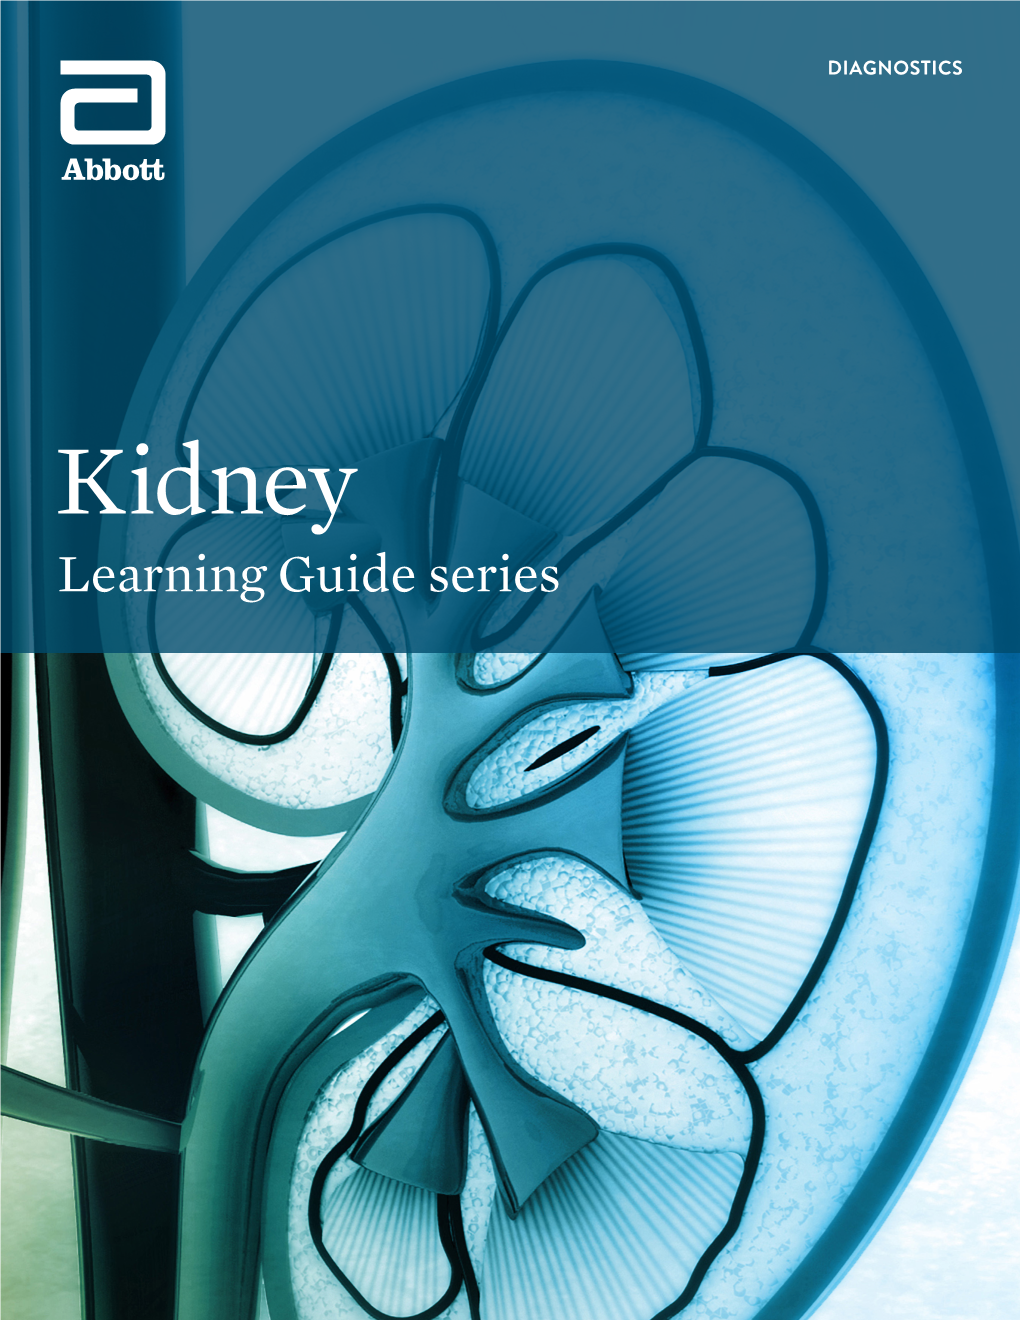 Kidney Learning Guide Series ACKNOWLEDGEMENTS